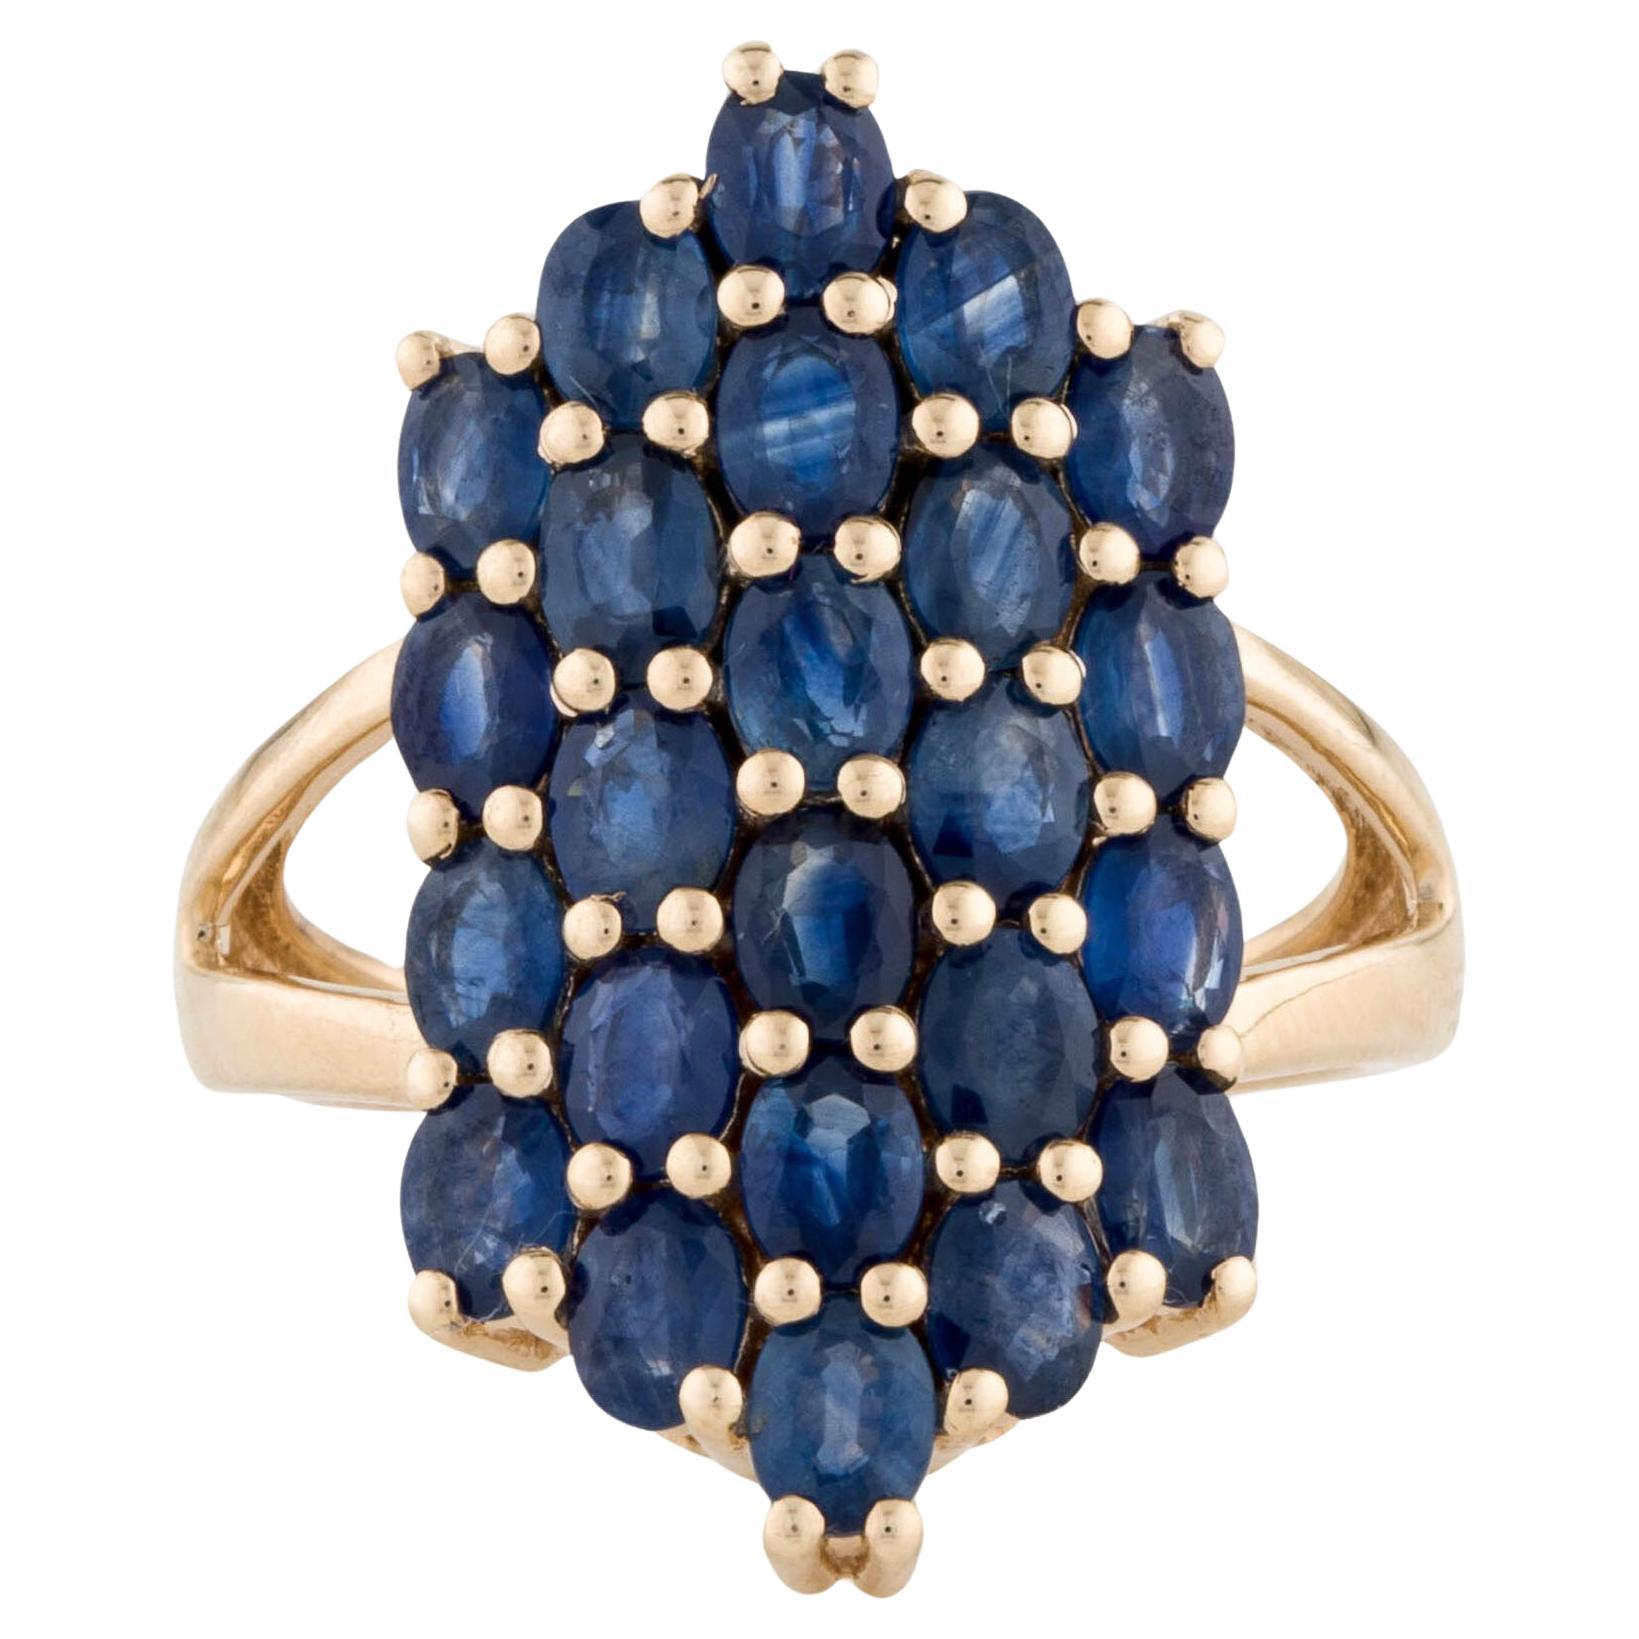 Luxurious 14K Sapphire Cocktail Ring, 4.81ctw, Size 6.75 - Statement Jewelry For Sale